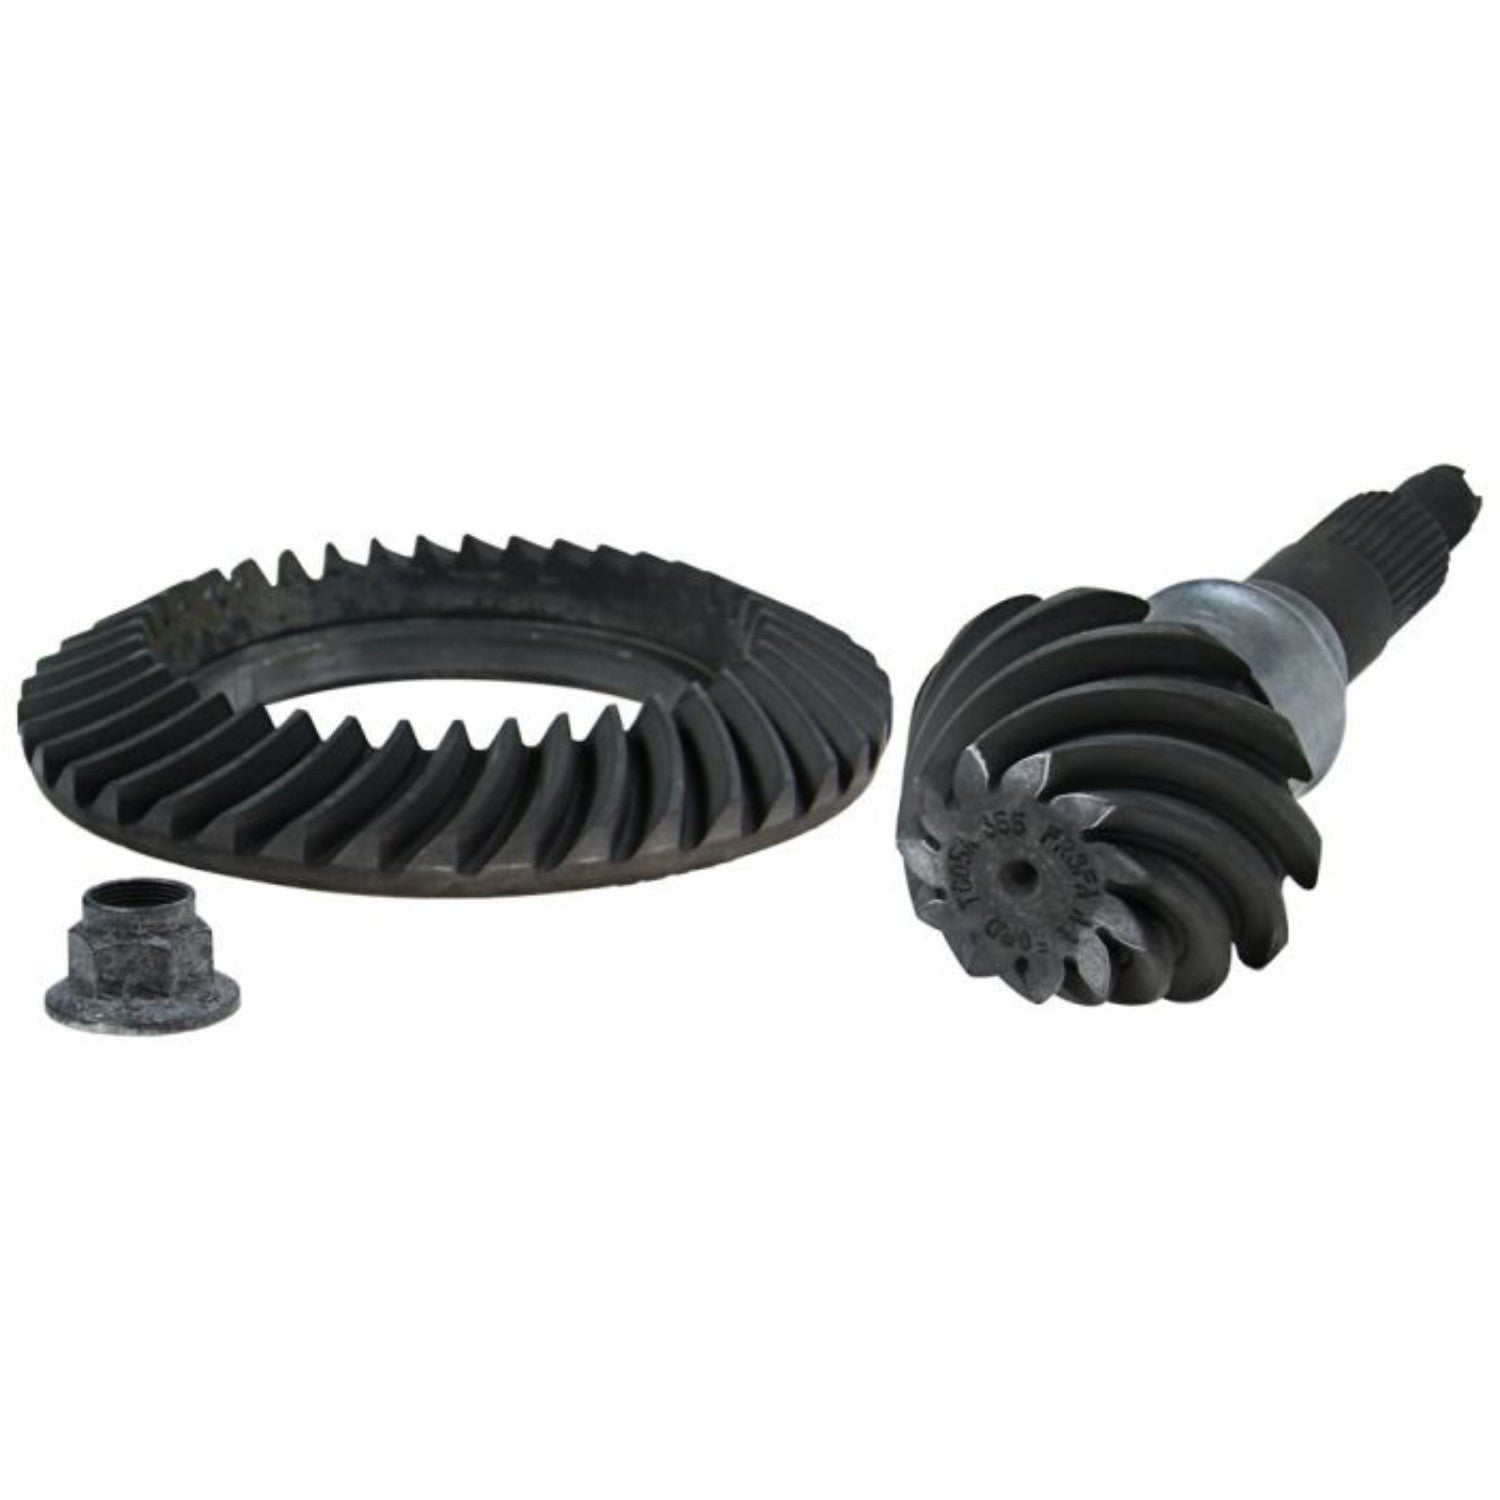 Ford Performance 2015-24 S550 Mustang 8.8" 4.09 IRS Diff Ring and Pinion Gear Set